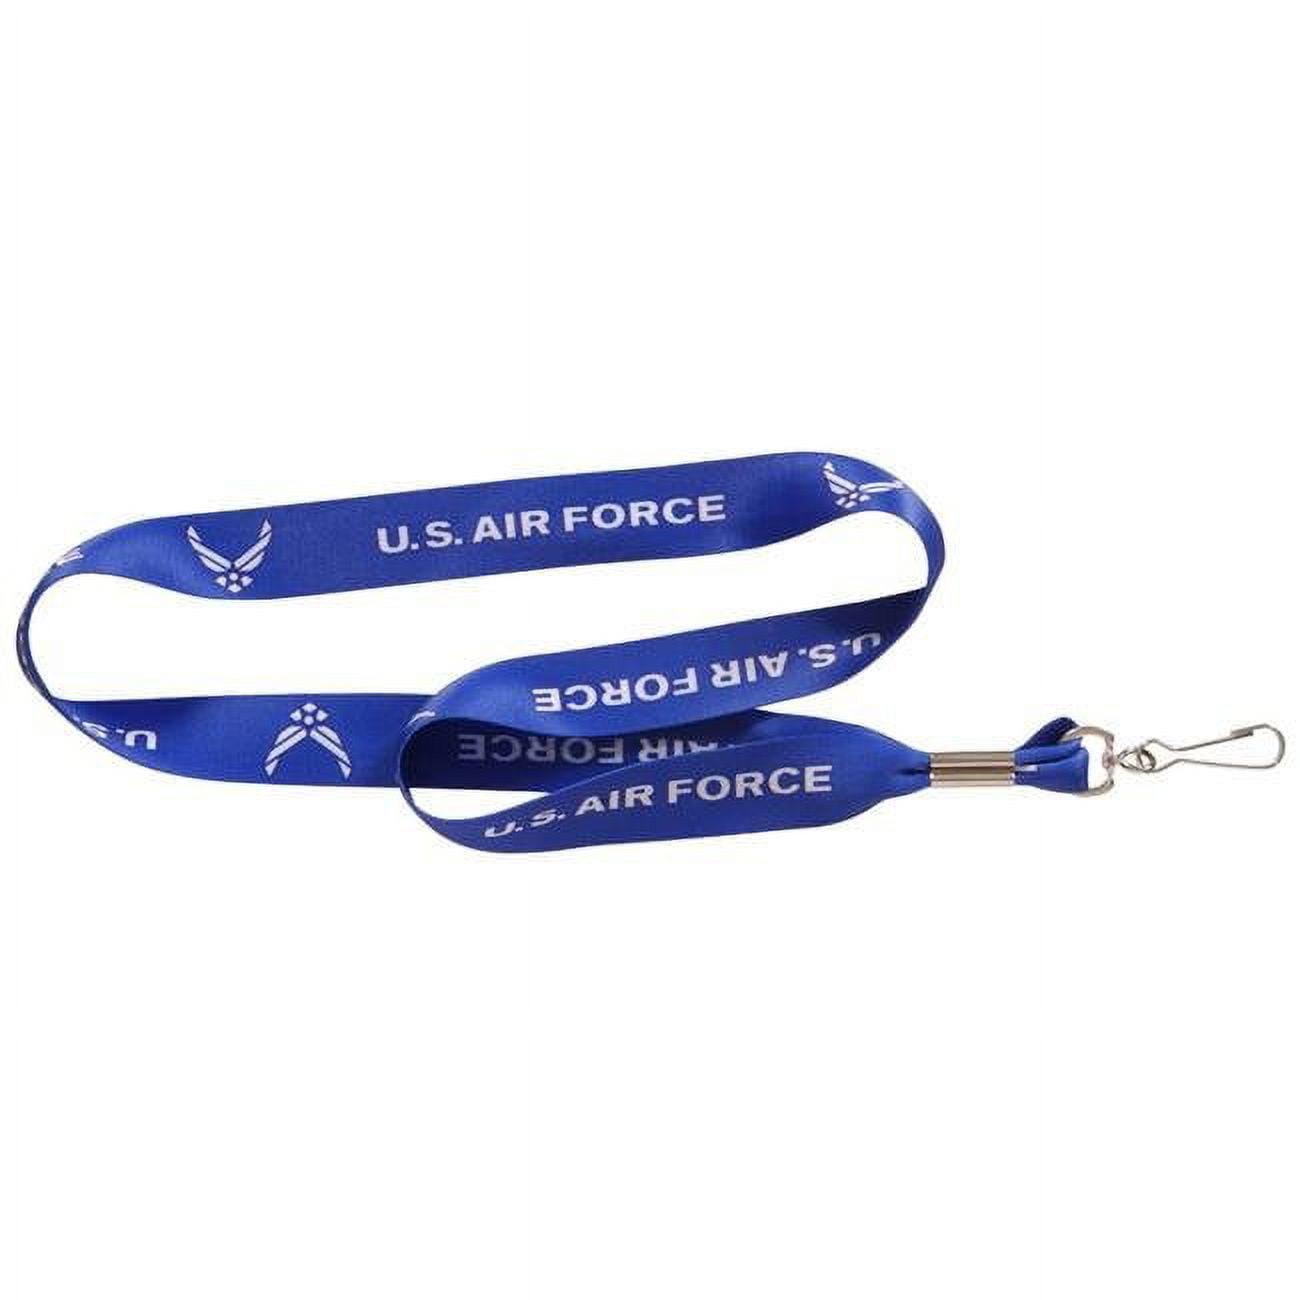 Picture of Hillman 5971213 Polyester Decorative Key Chain Lanyard, U.S. Air Force - Pack of 6